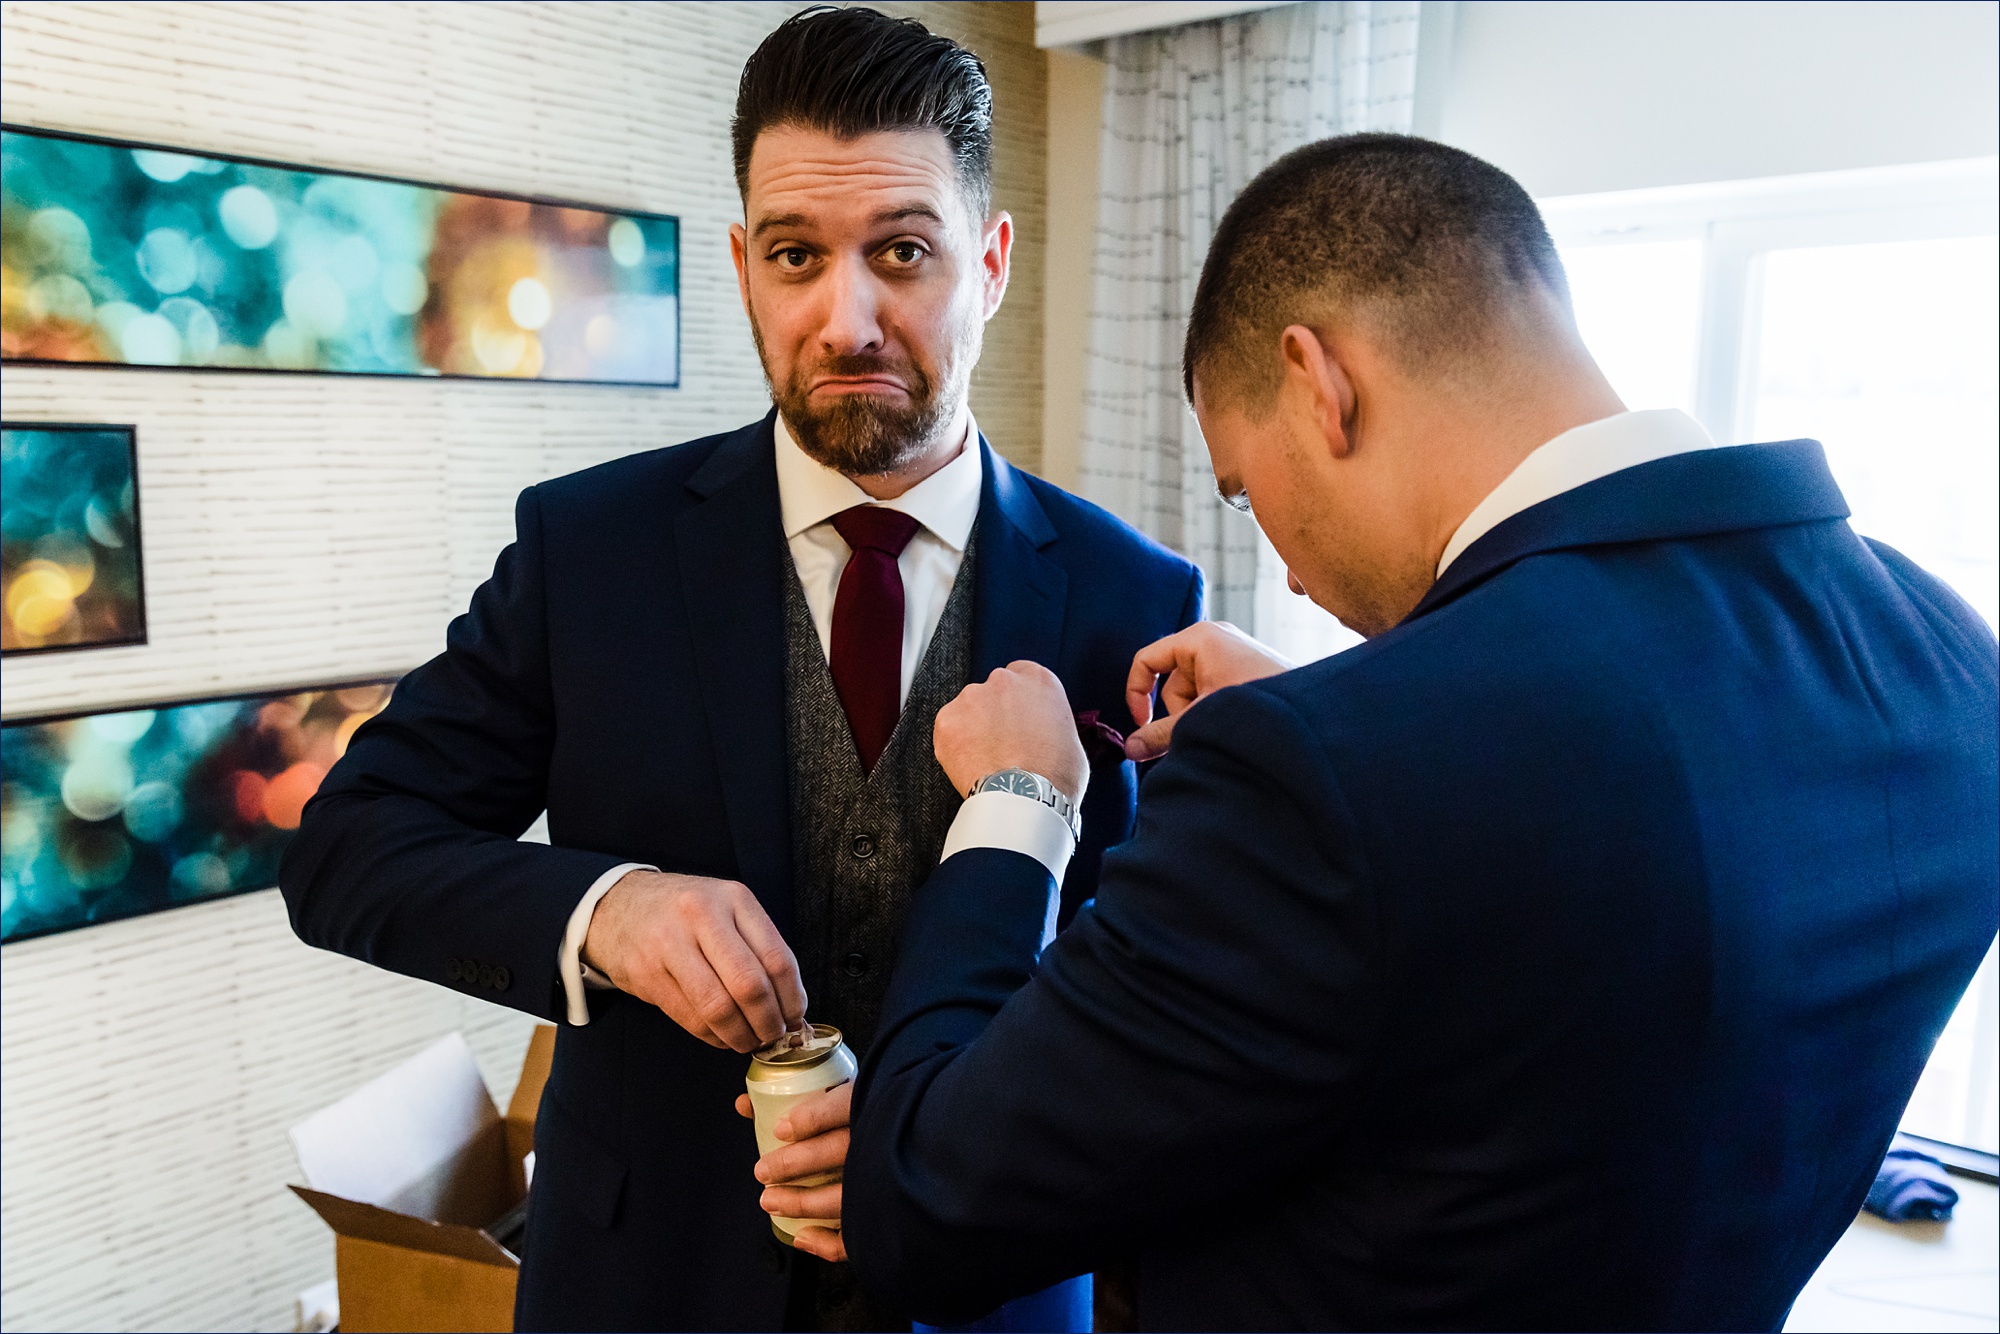 The groom cracks open a cold one while a groomsman gets his pocket square set